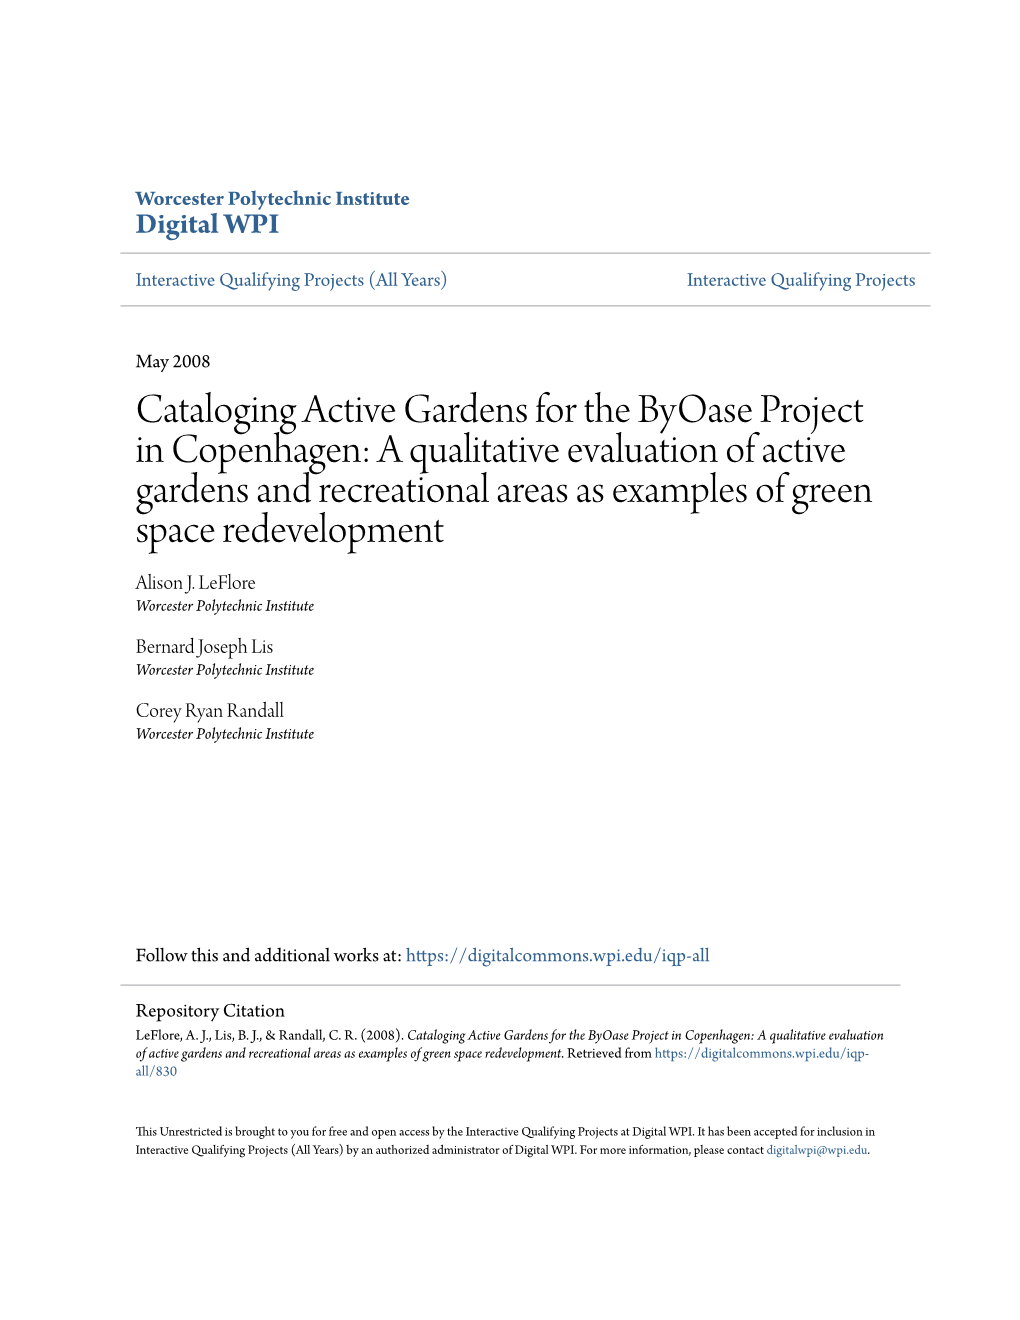 A Qualitative Evaluation of Active Gardens and Recreational Areas As Examples of Green Space Redevelopment Alison J